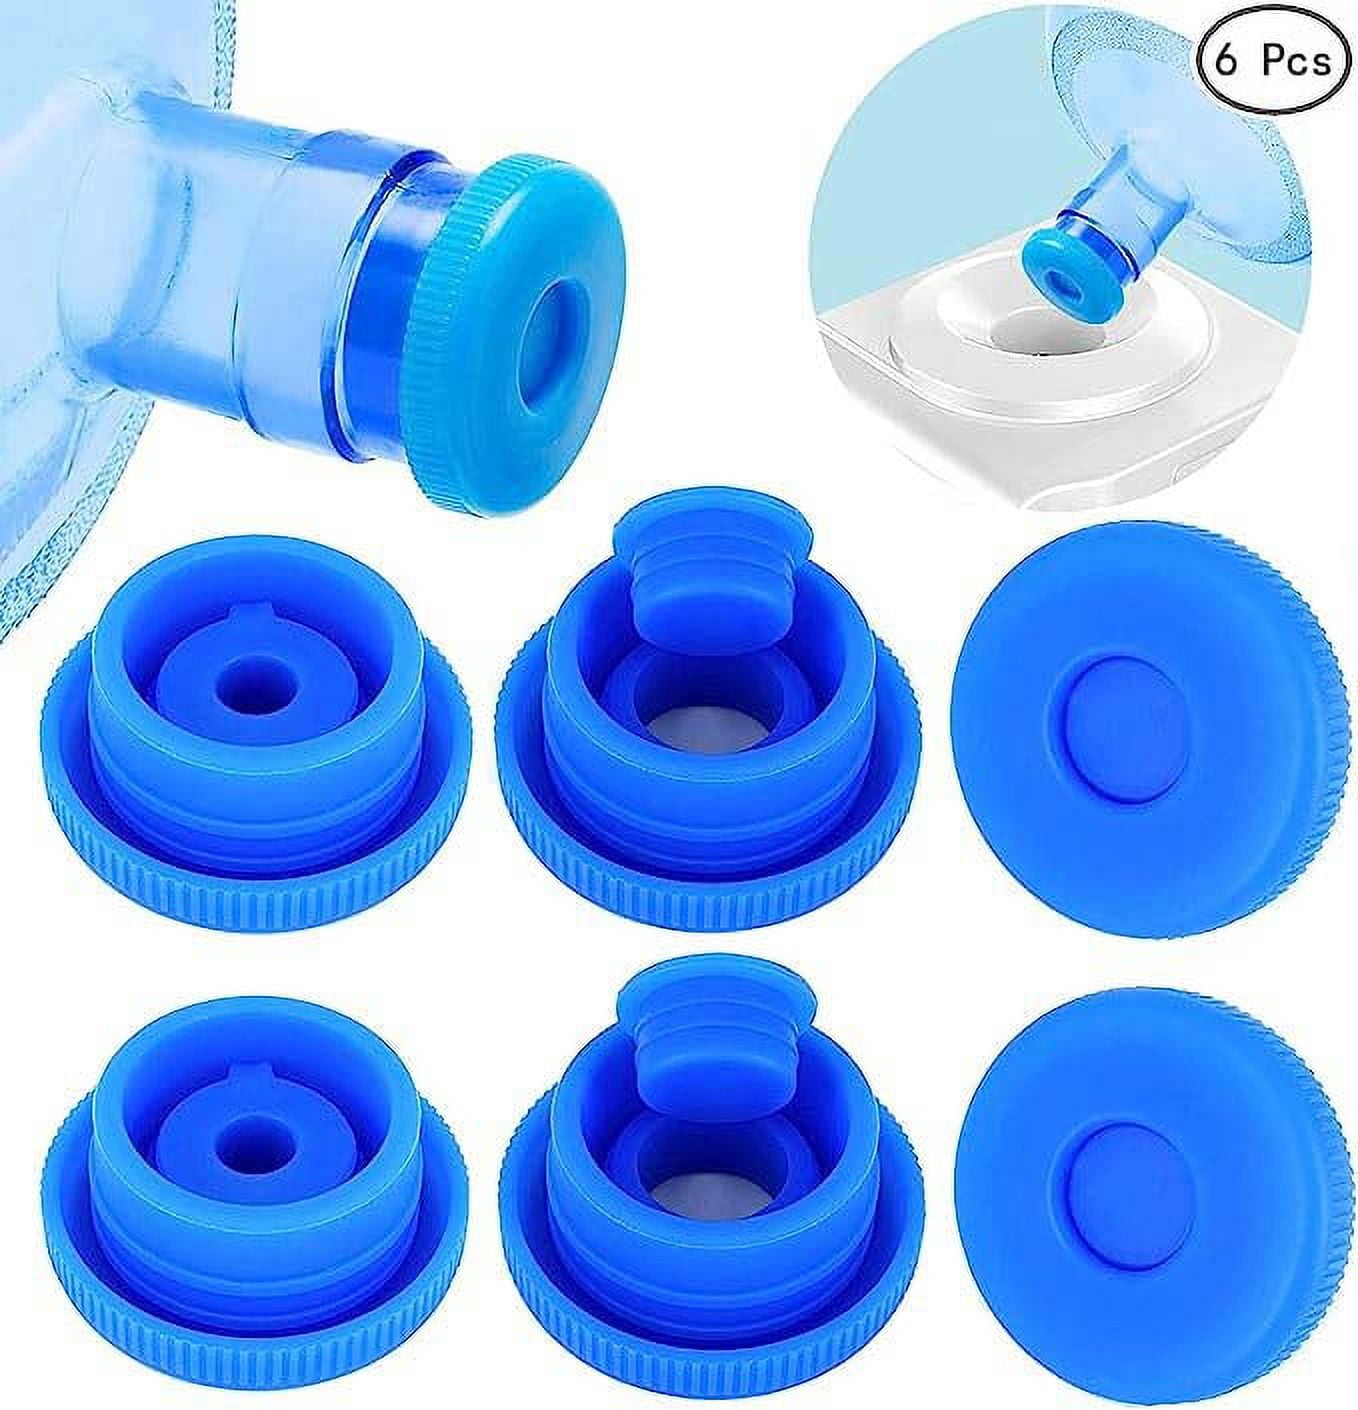 4 Silicone Caps For Jugs – Alive Water